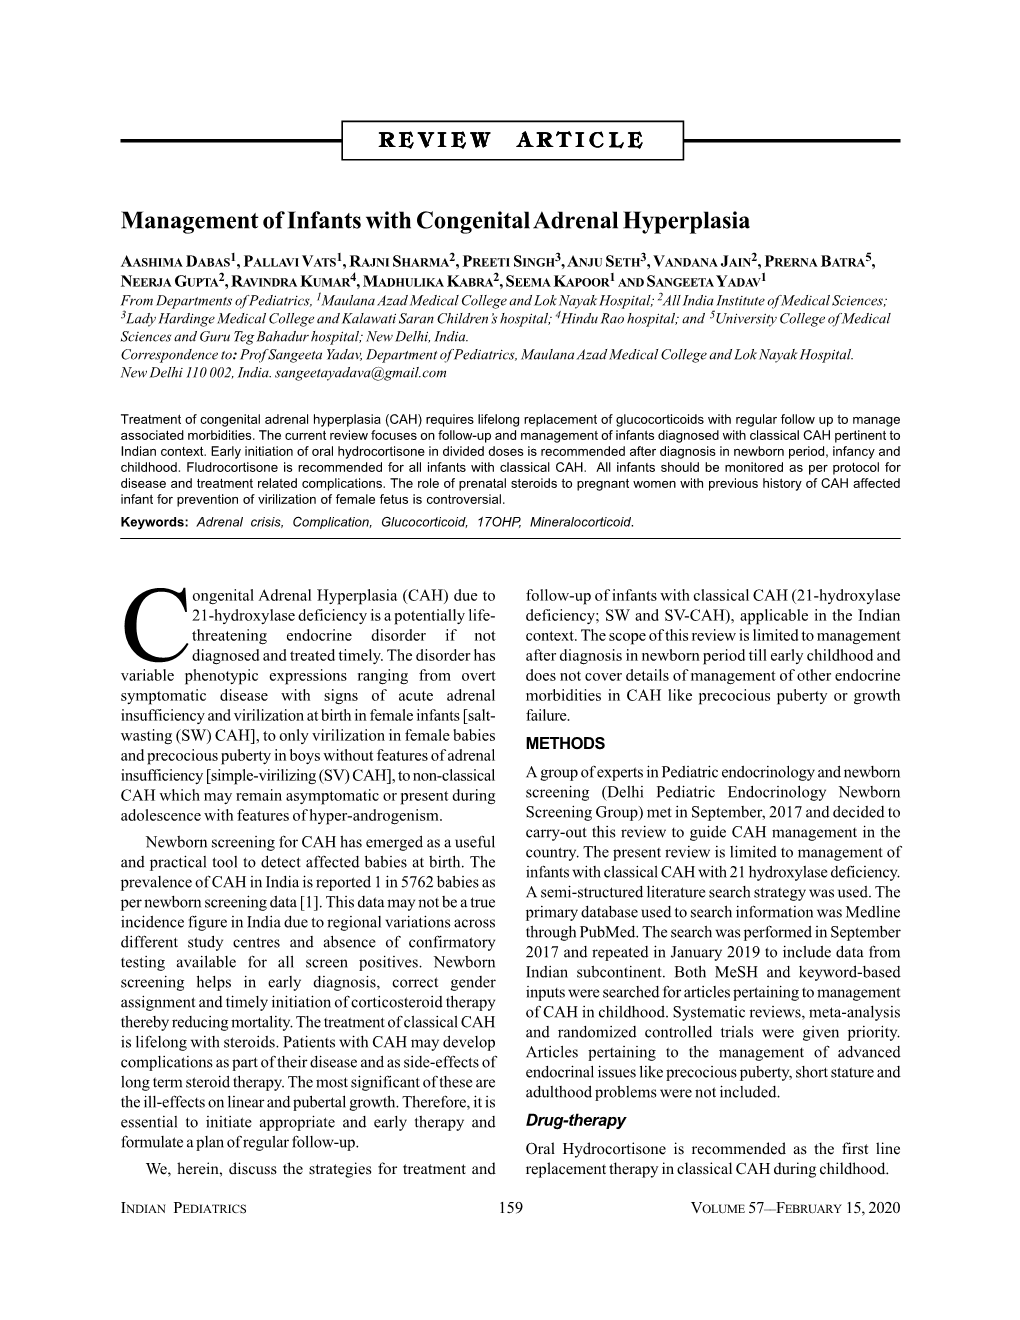 Management of Infants with Congenital Adrenal Hyperplasia